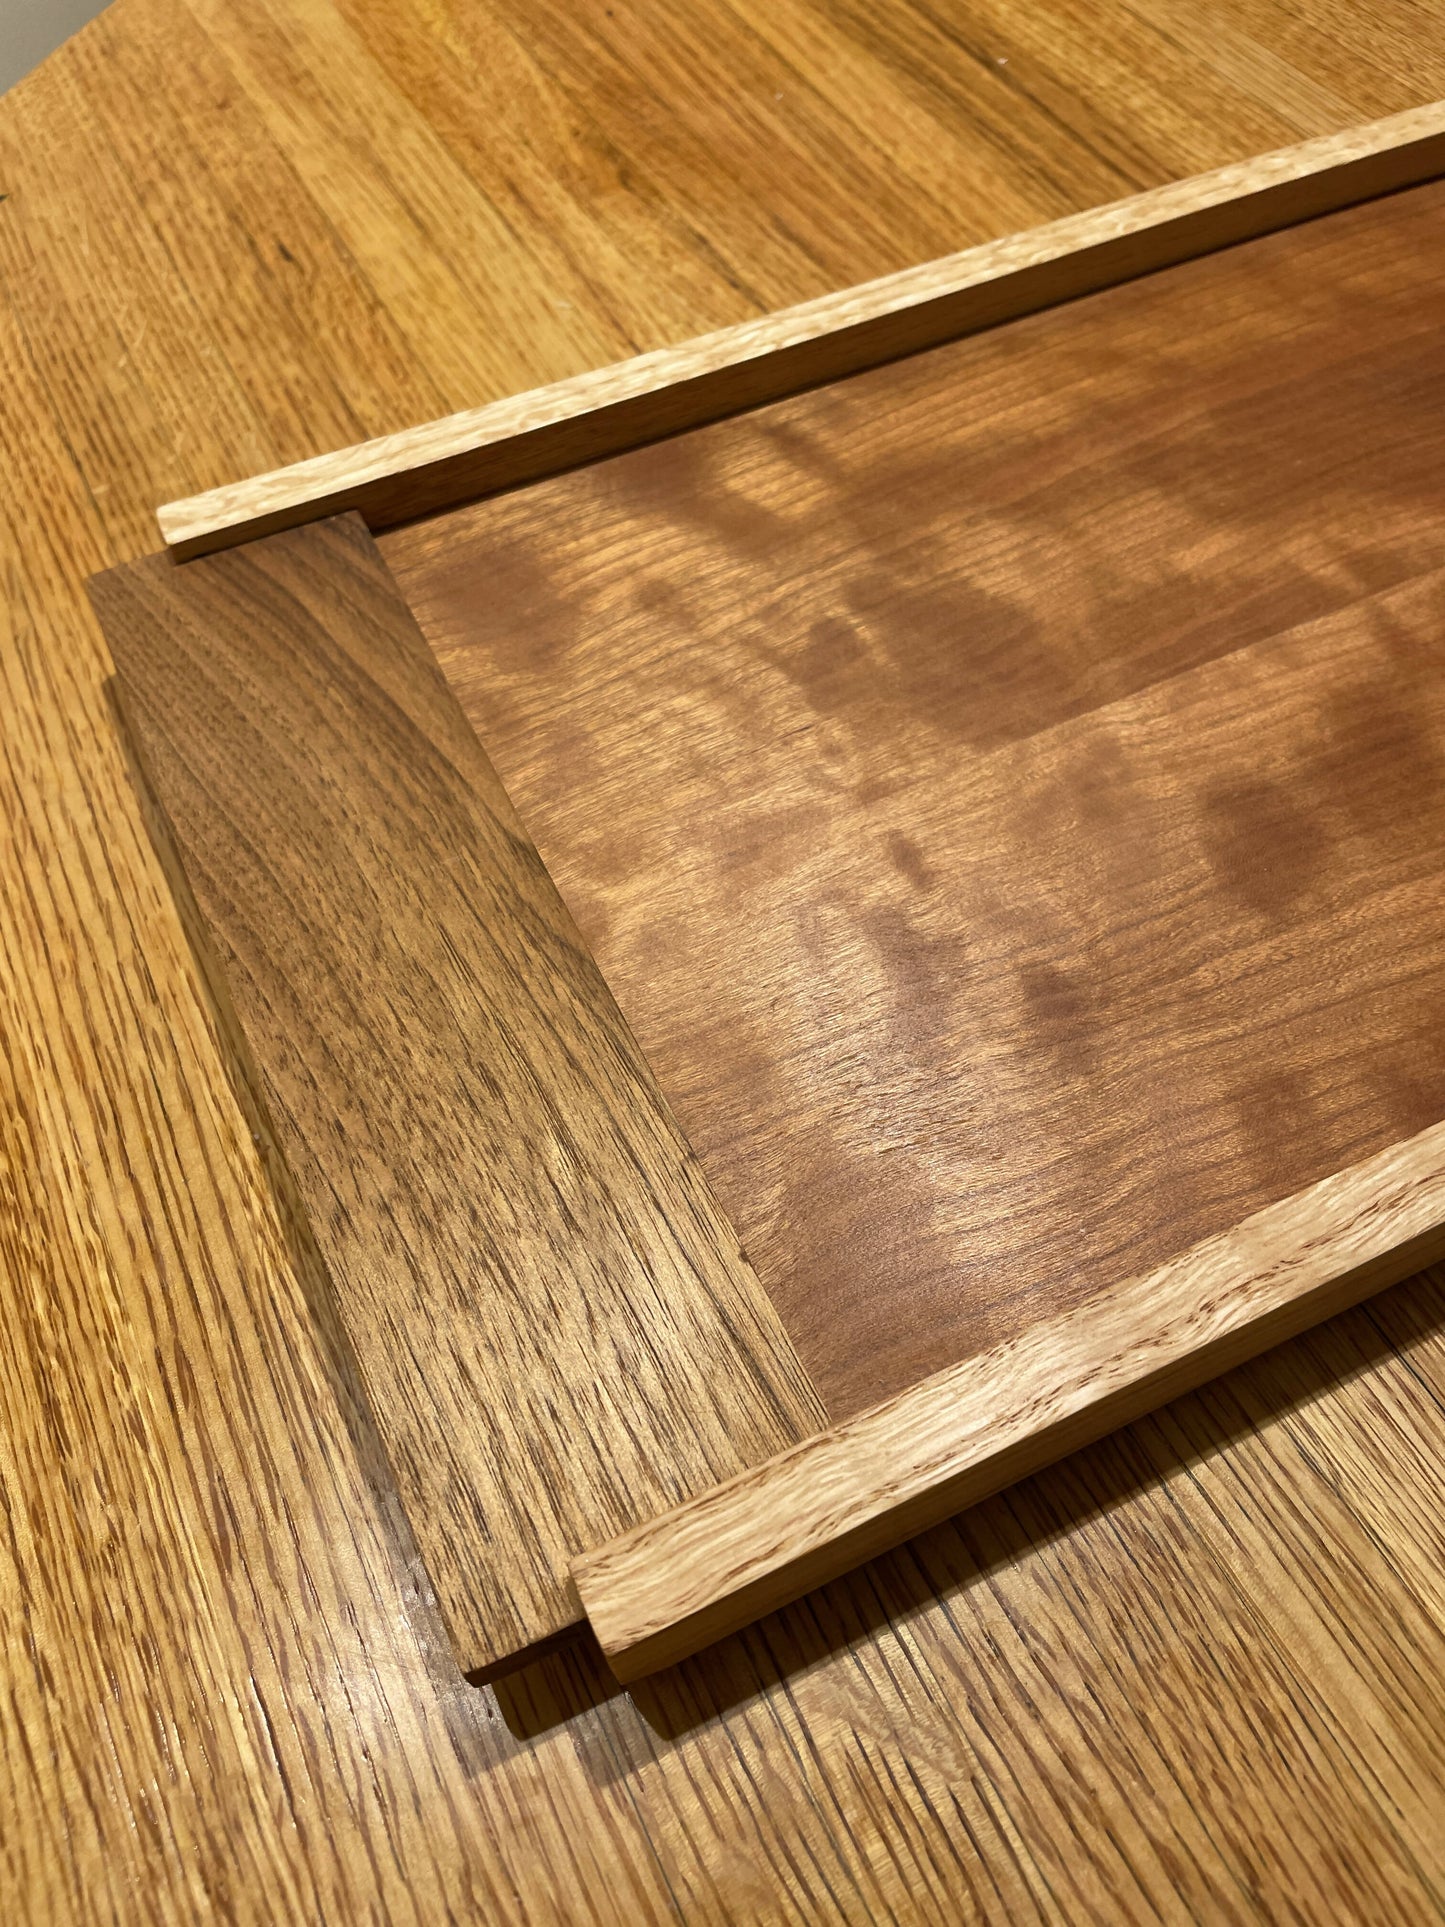 Serving Tray in Chestnut, Walnut and Cherry